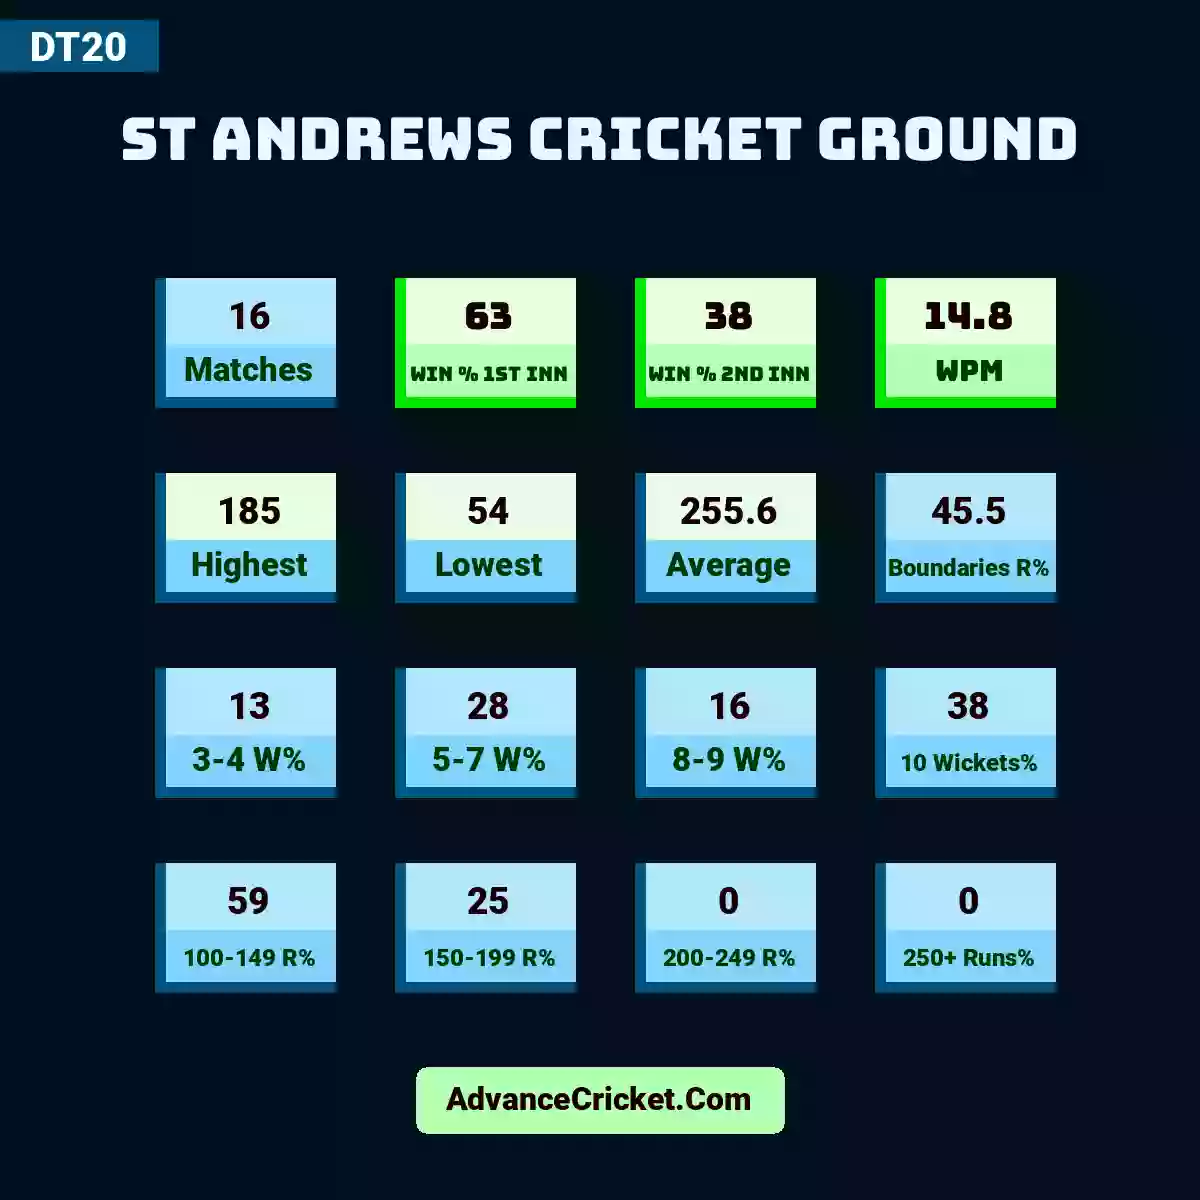 Image showing St Andrews Cricket Ground DT20 with Matches: 16, Win % 1st Inn: 63, Win % 2nd Inn: 38, WPM: 14.8, Highest: 185, Lowest: 54, Average: 255.6, Boundaries R%: 45.5, 3-4 W%: 13, 5-7 W%: 28, 8-9 W%: 16, 10 Wickets%: 38, 100-149 R%: 59, 150-199 R%: 25, 200-249 R%: 0, 250+ Runs%: 0.